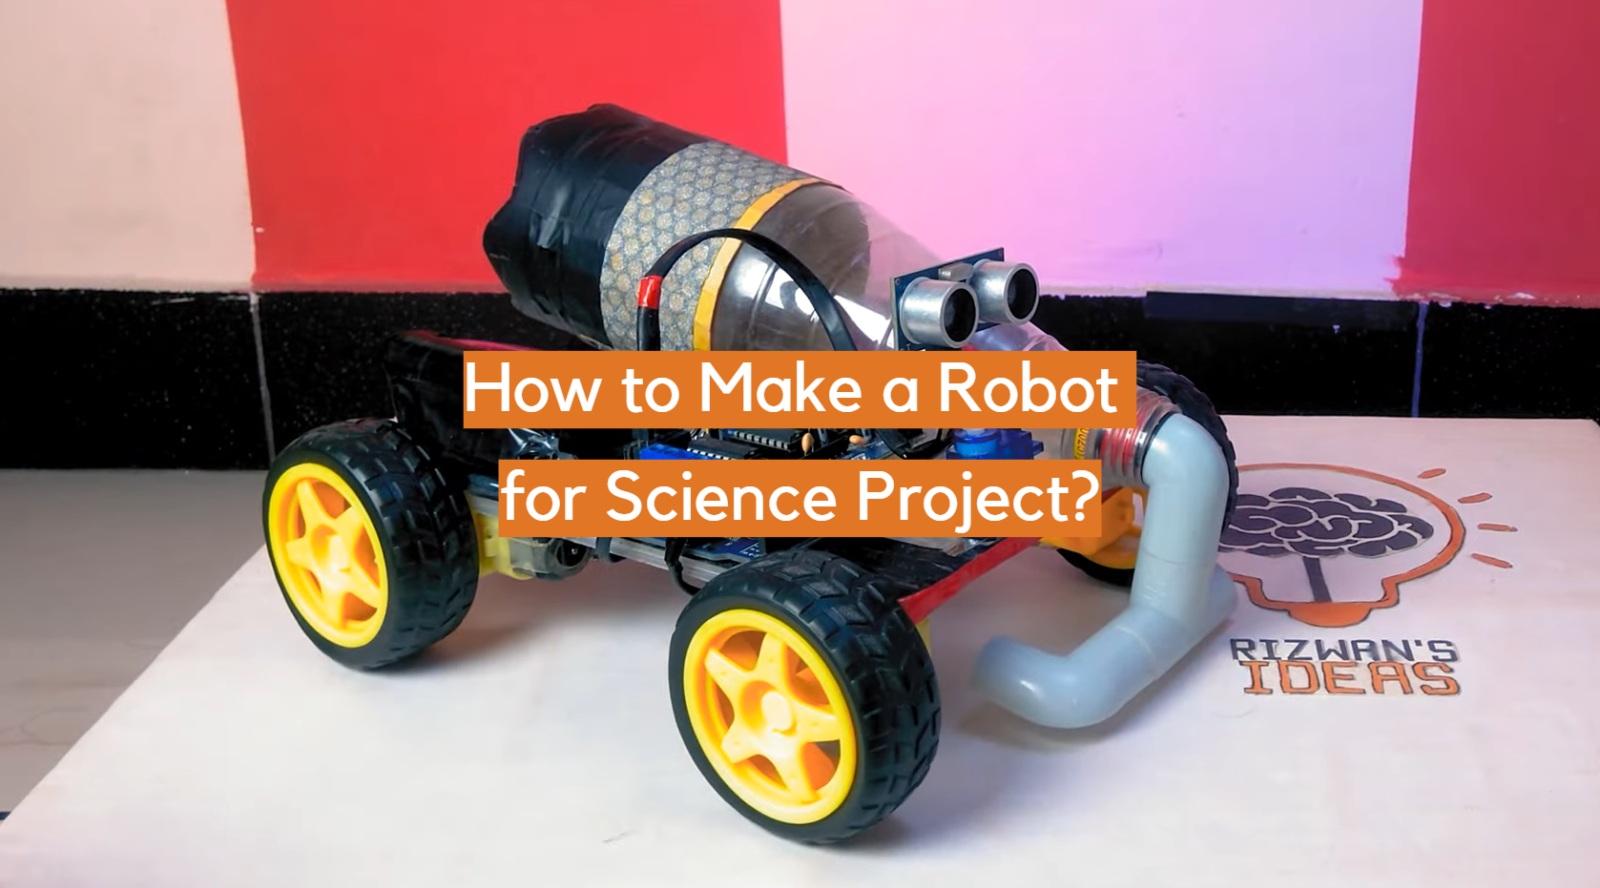 How to Make a Robot for Science Project?